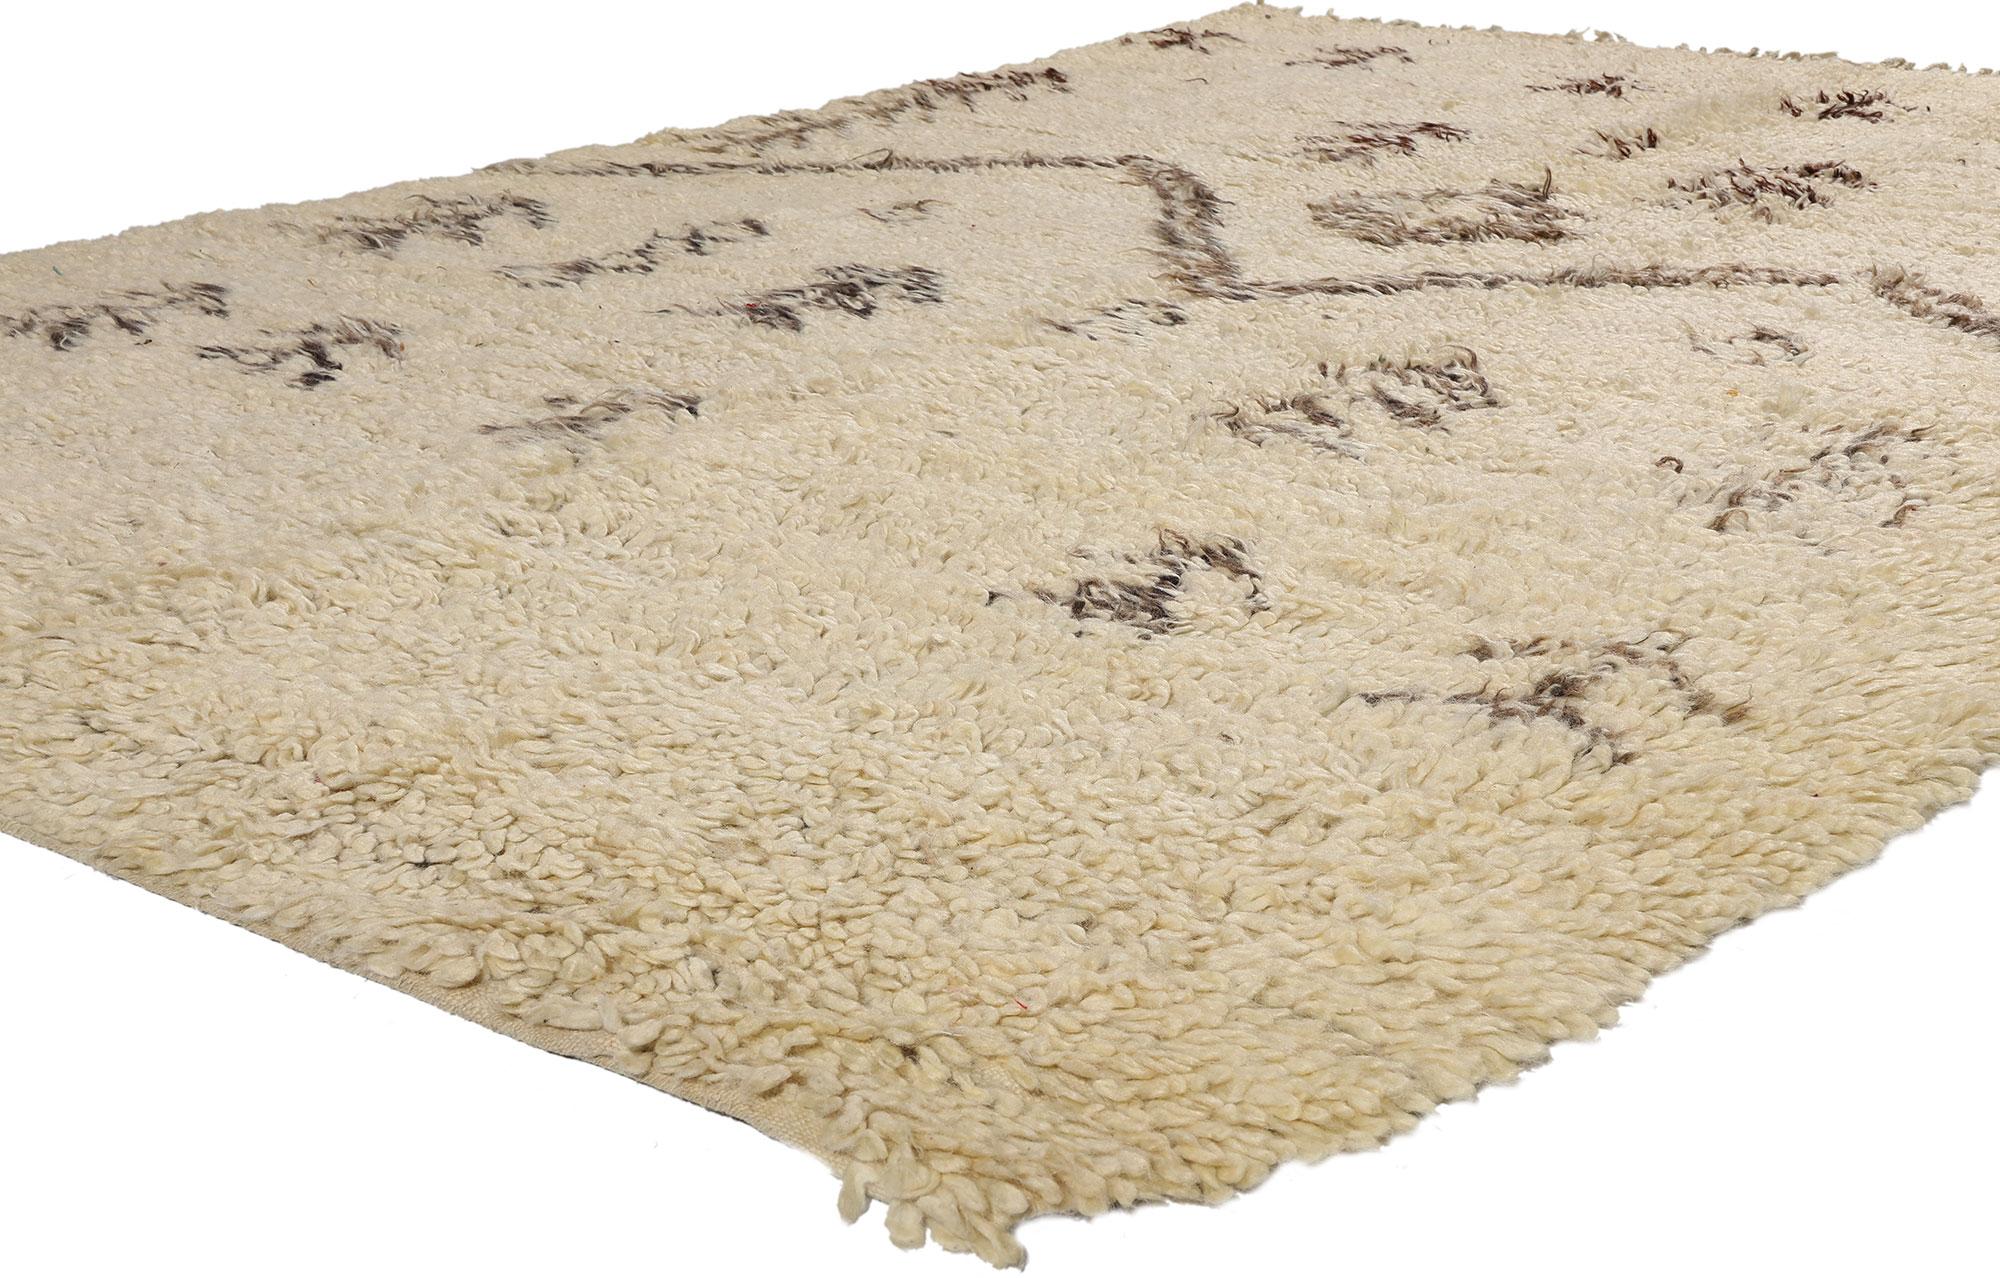 21730 Vintage Neutral Moroccan Azilal Rug, 06'02 x 09'00. Crafted by skilled Berber artisans in Morocco's Azilal region, Earth-Tone Moroccan Azilal rugs are a testament to nature's muted hues, distinguishing them from their vibrant counterparts.